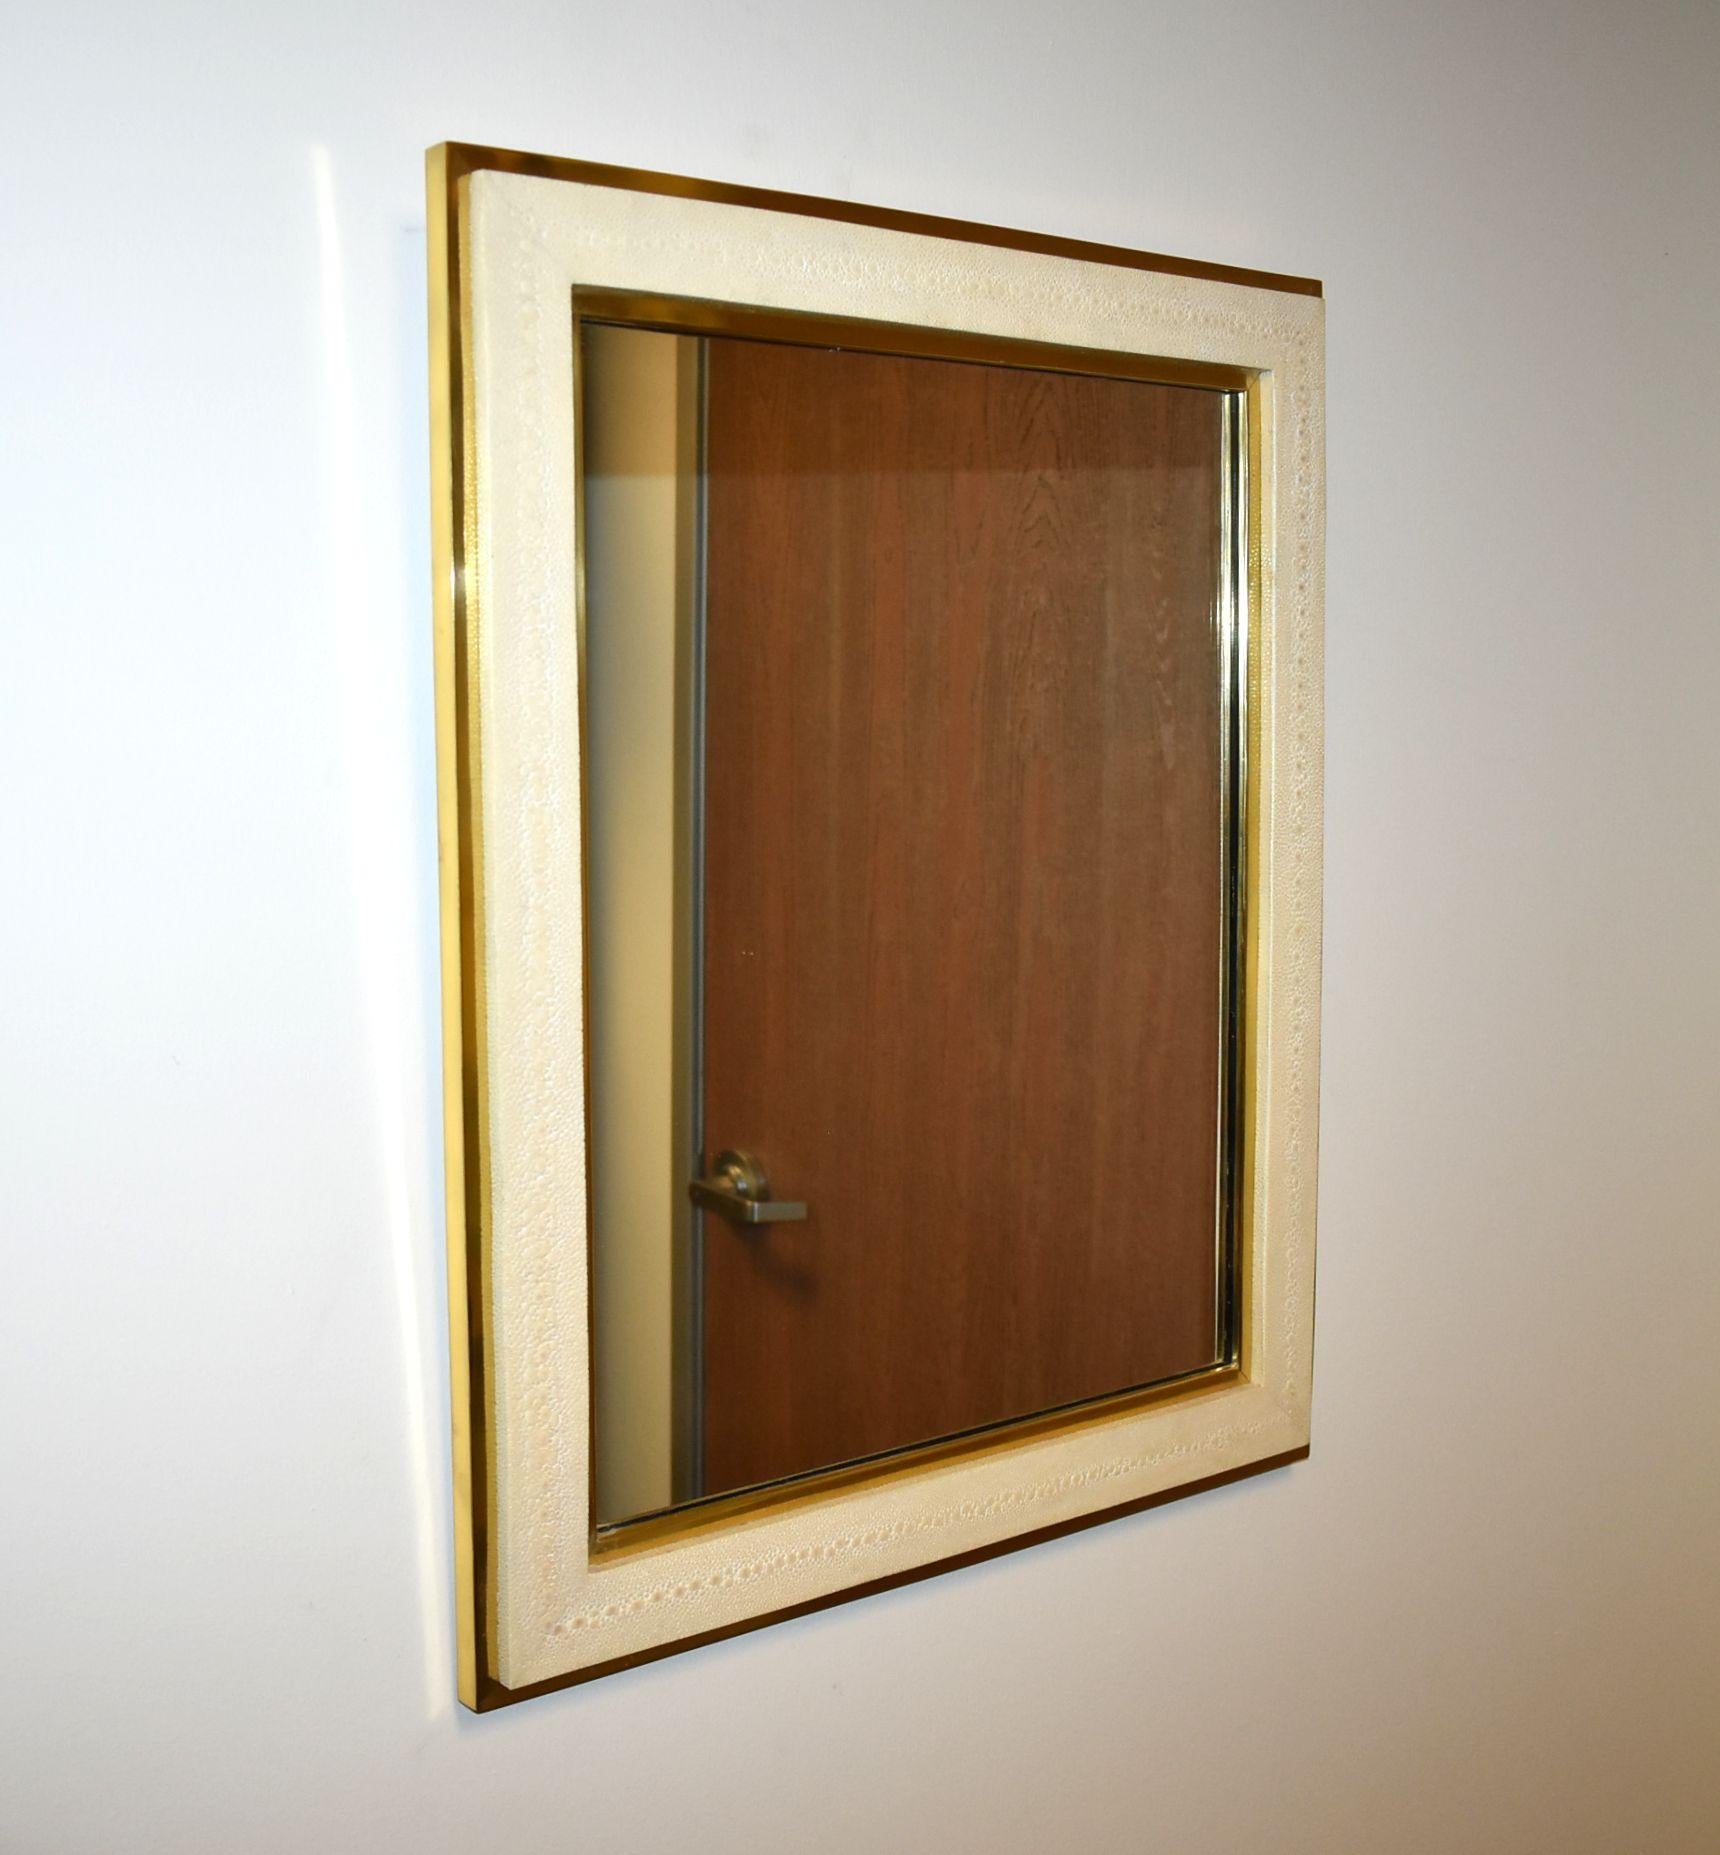 Rectangular mirror cover with beige shagreen and brass frame and detail.